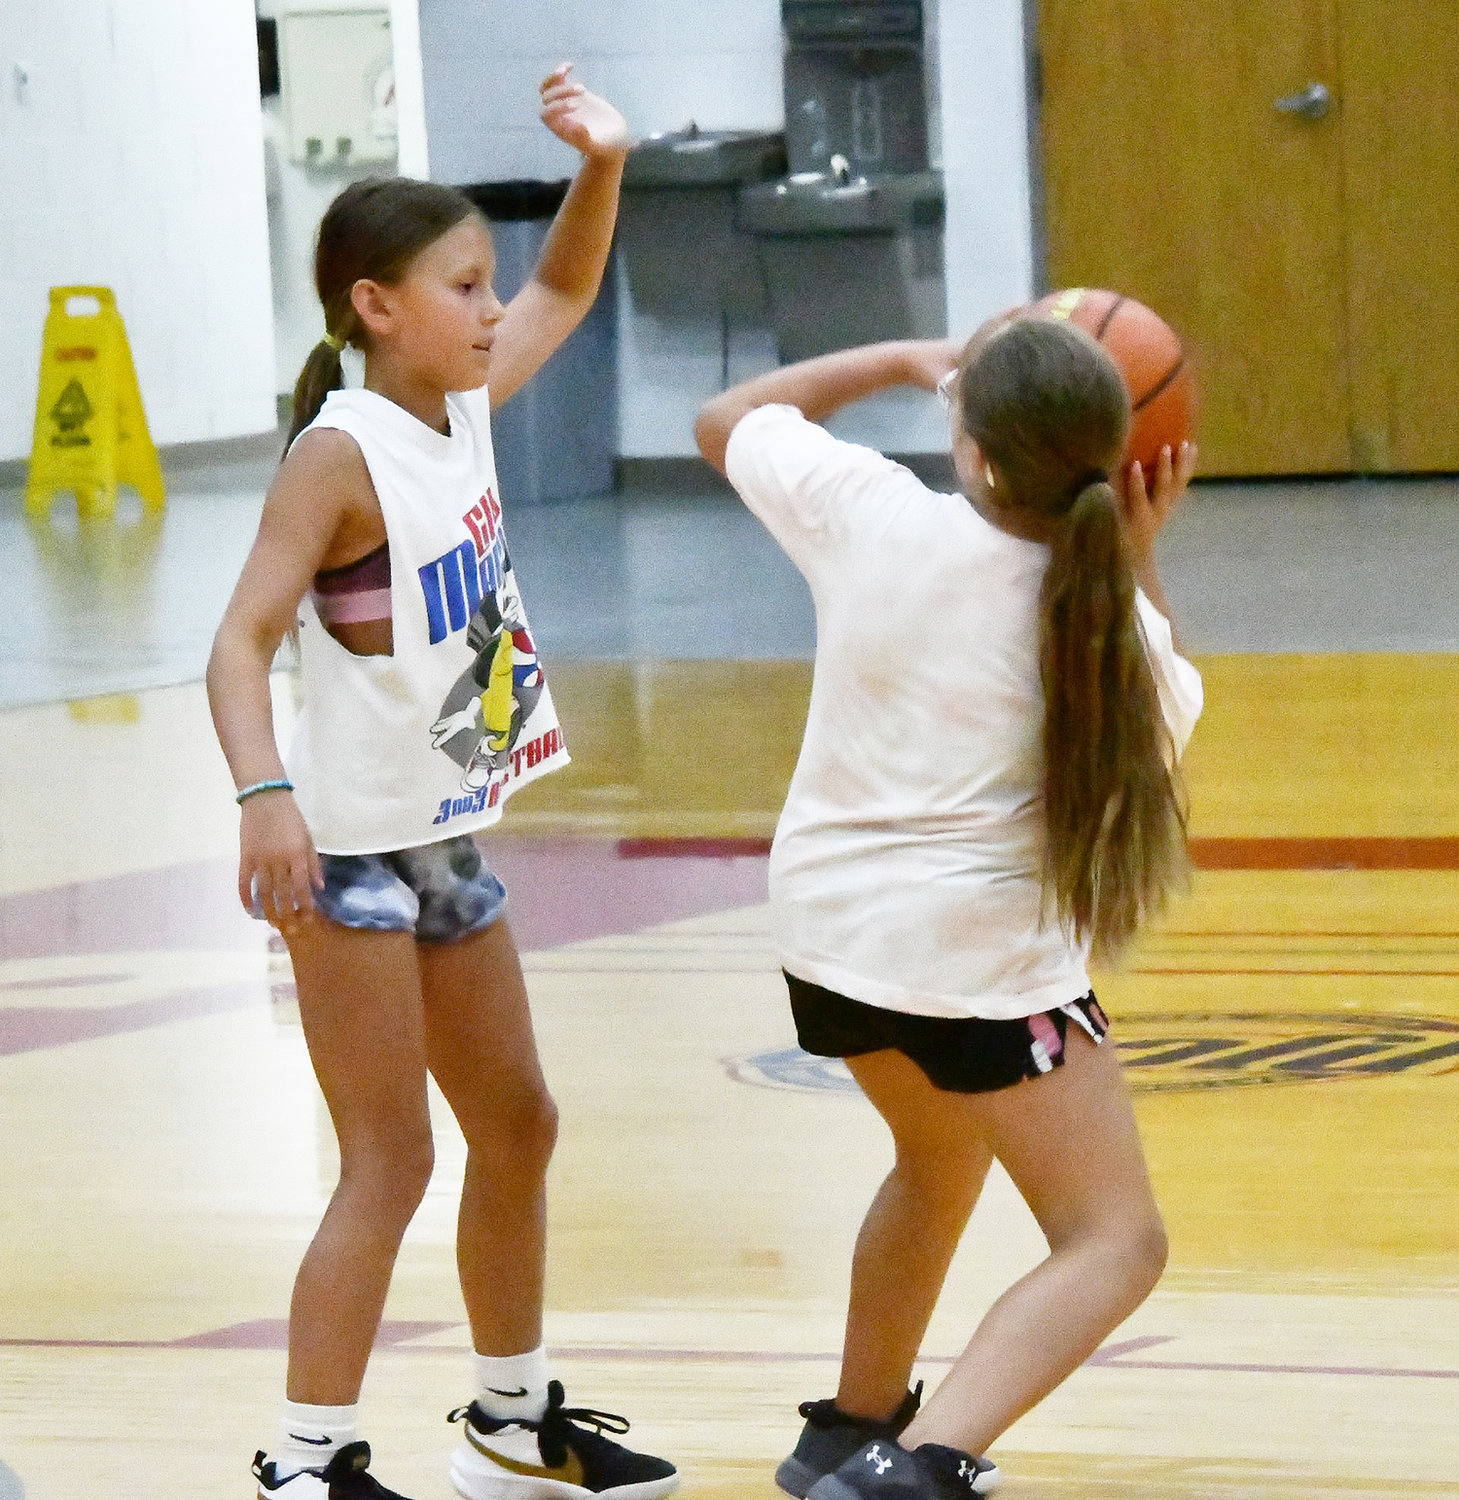 Ally Scott tries to shoot while Brelee David defends during a one-on-one game.